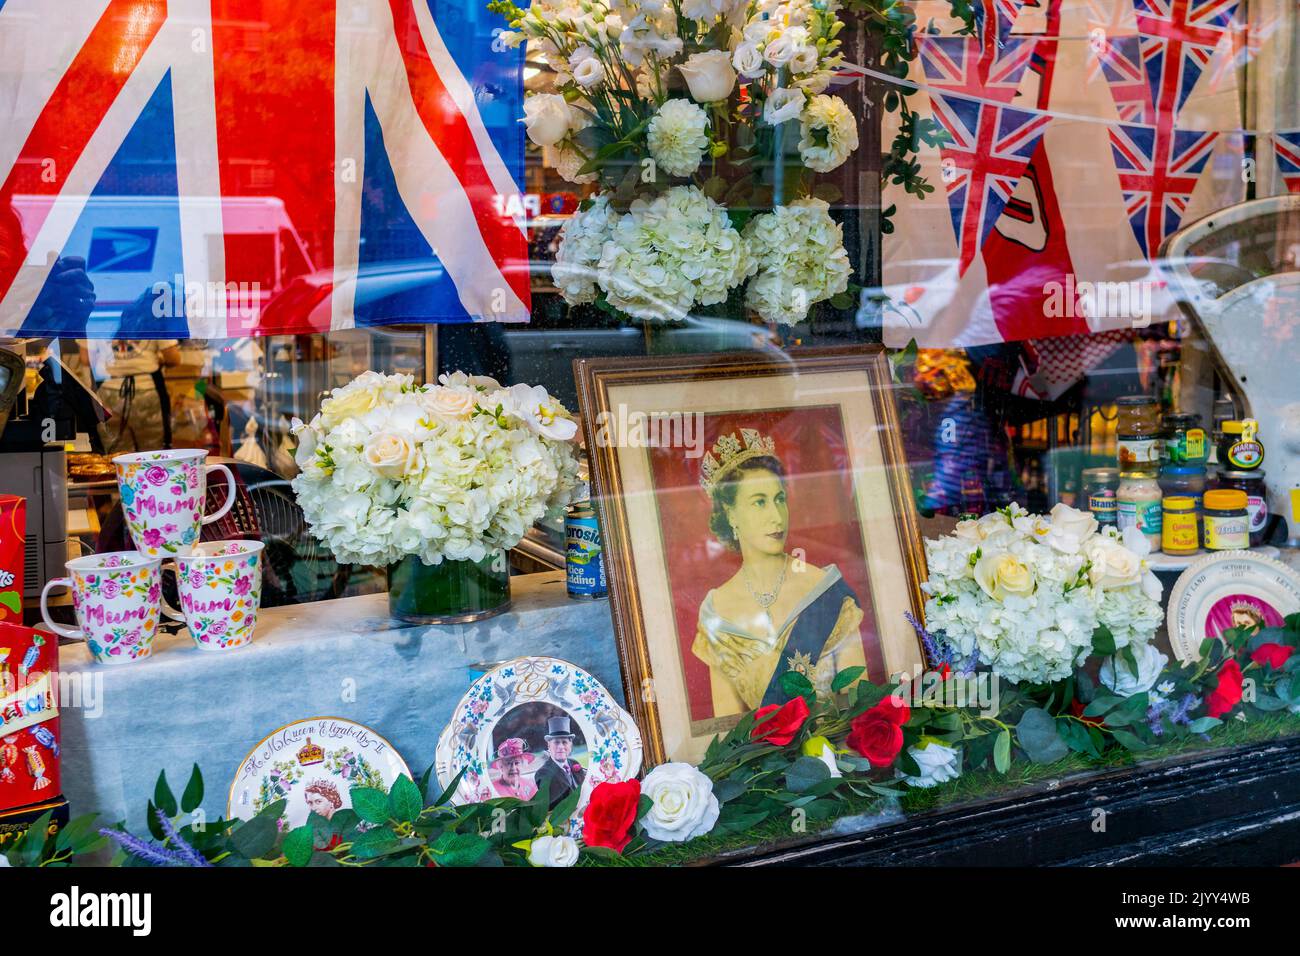 A memorial to Queen Elizabeth II in the window of the Anglophile store Myers of Keswick in Greenwich Village in New York on Thursday, September 8, 2022. The long-reigning monarch of the United Kingdom died at the age of 96 at Balmoral Castle in Scotland. (© Richard B. Levine) Stock Photo